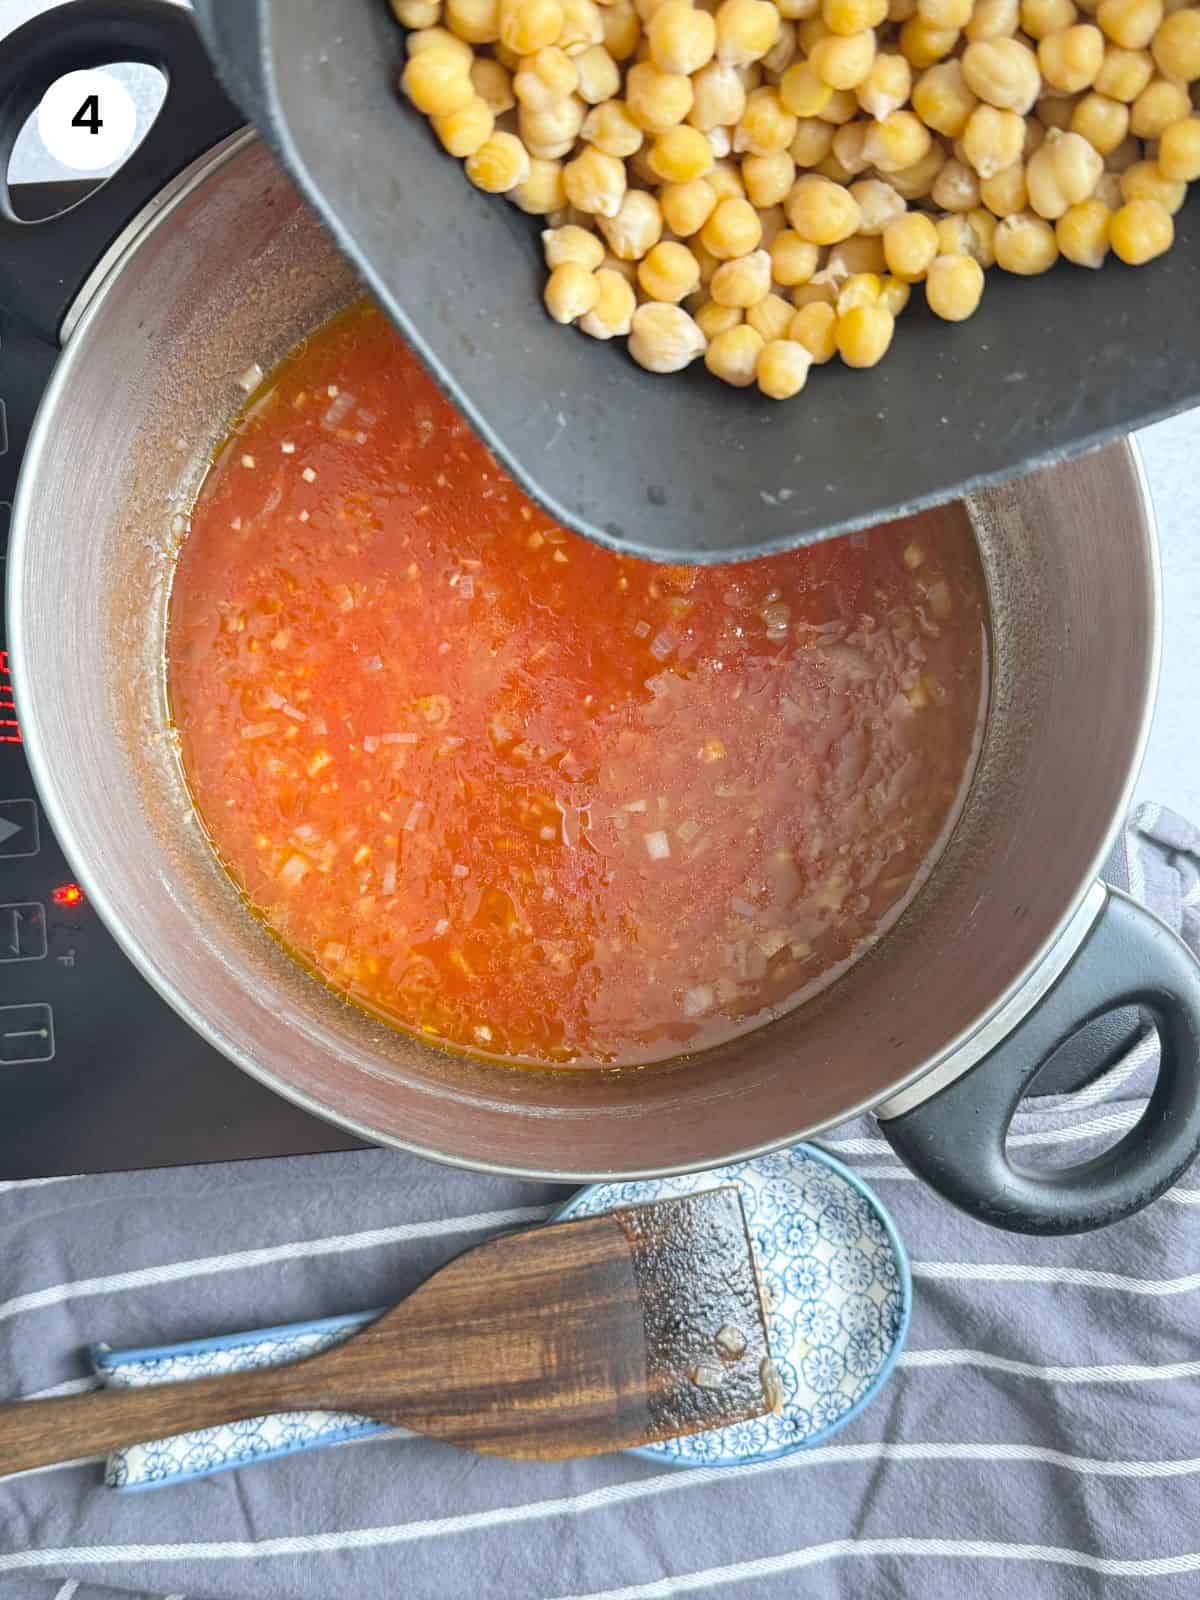 Adding the chickpeas to the pot with tomato sauce.